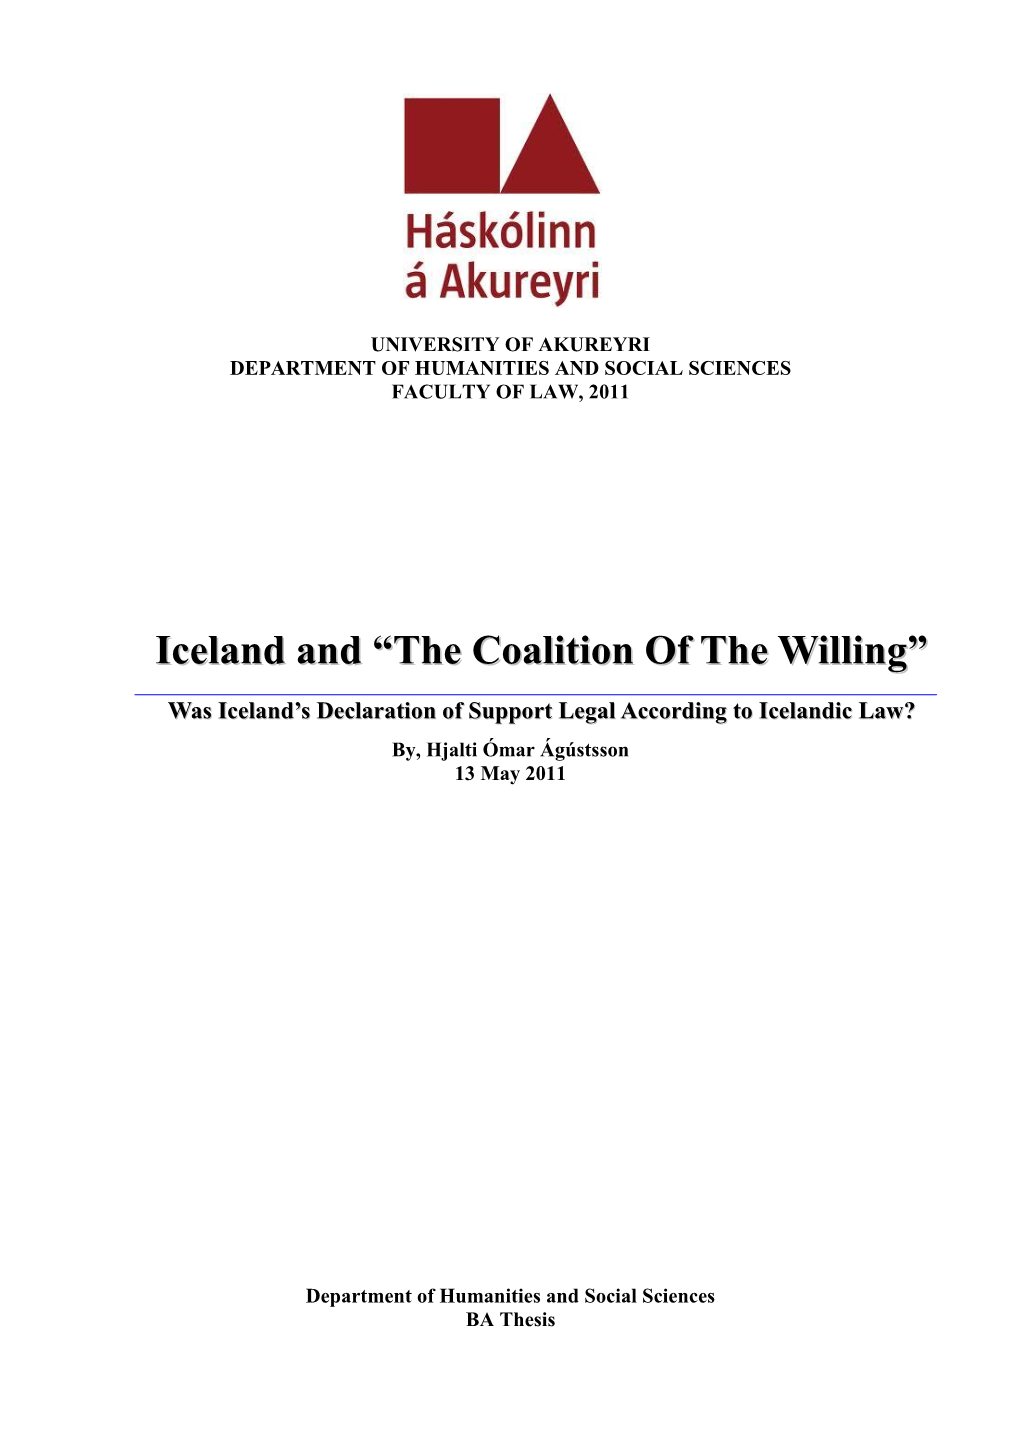 Iceland and “The Coalition of the Willing”